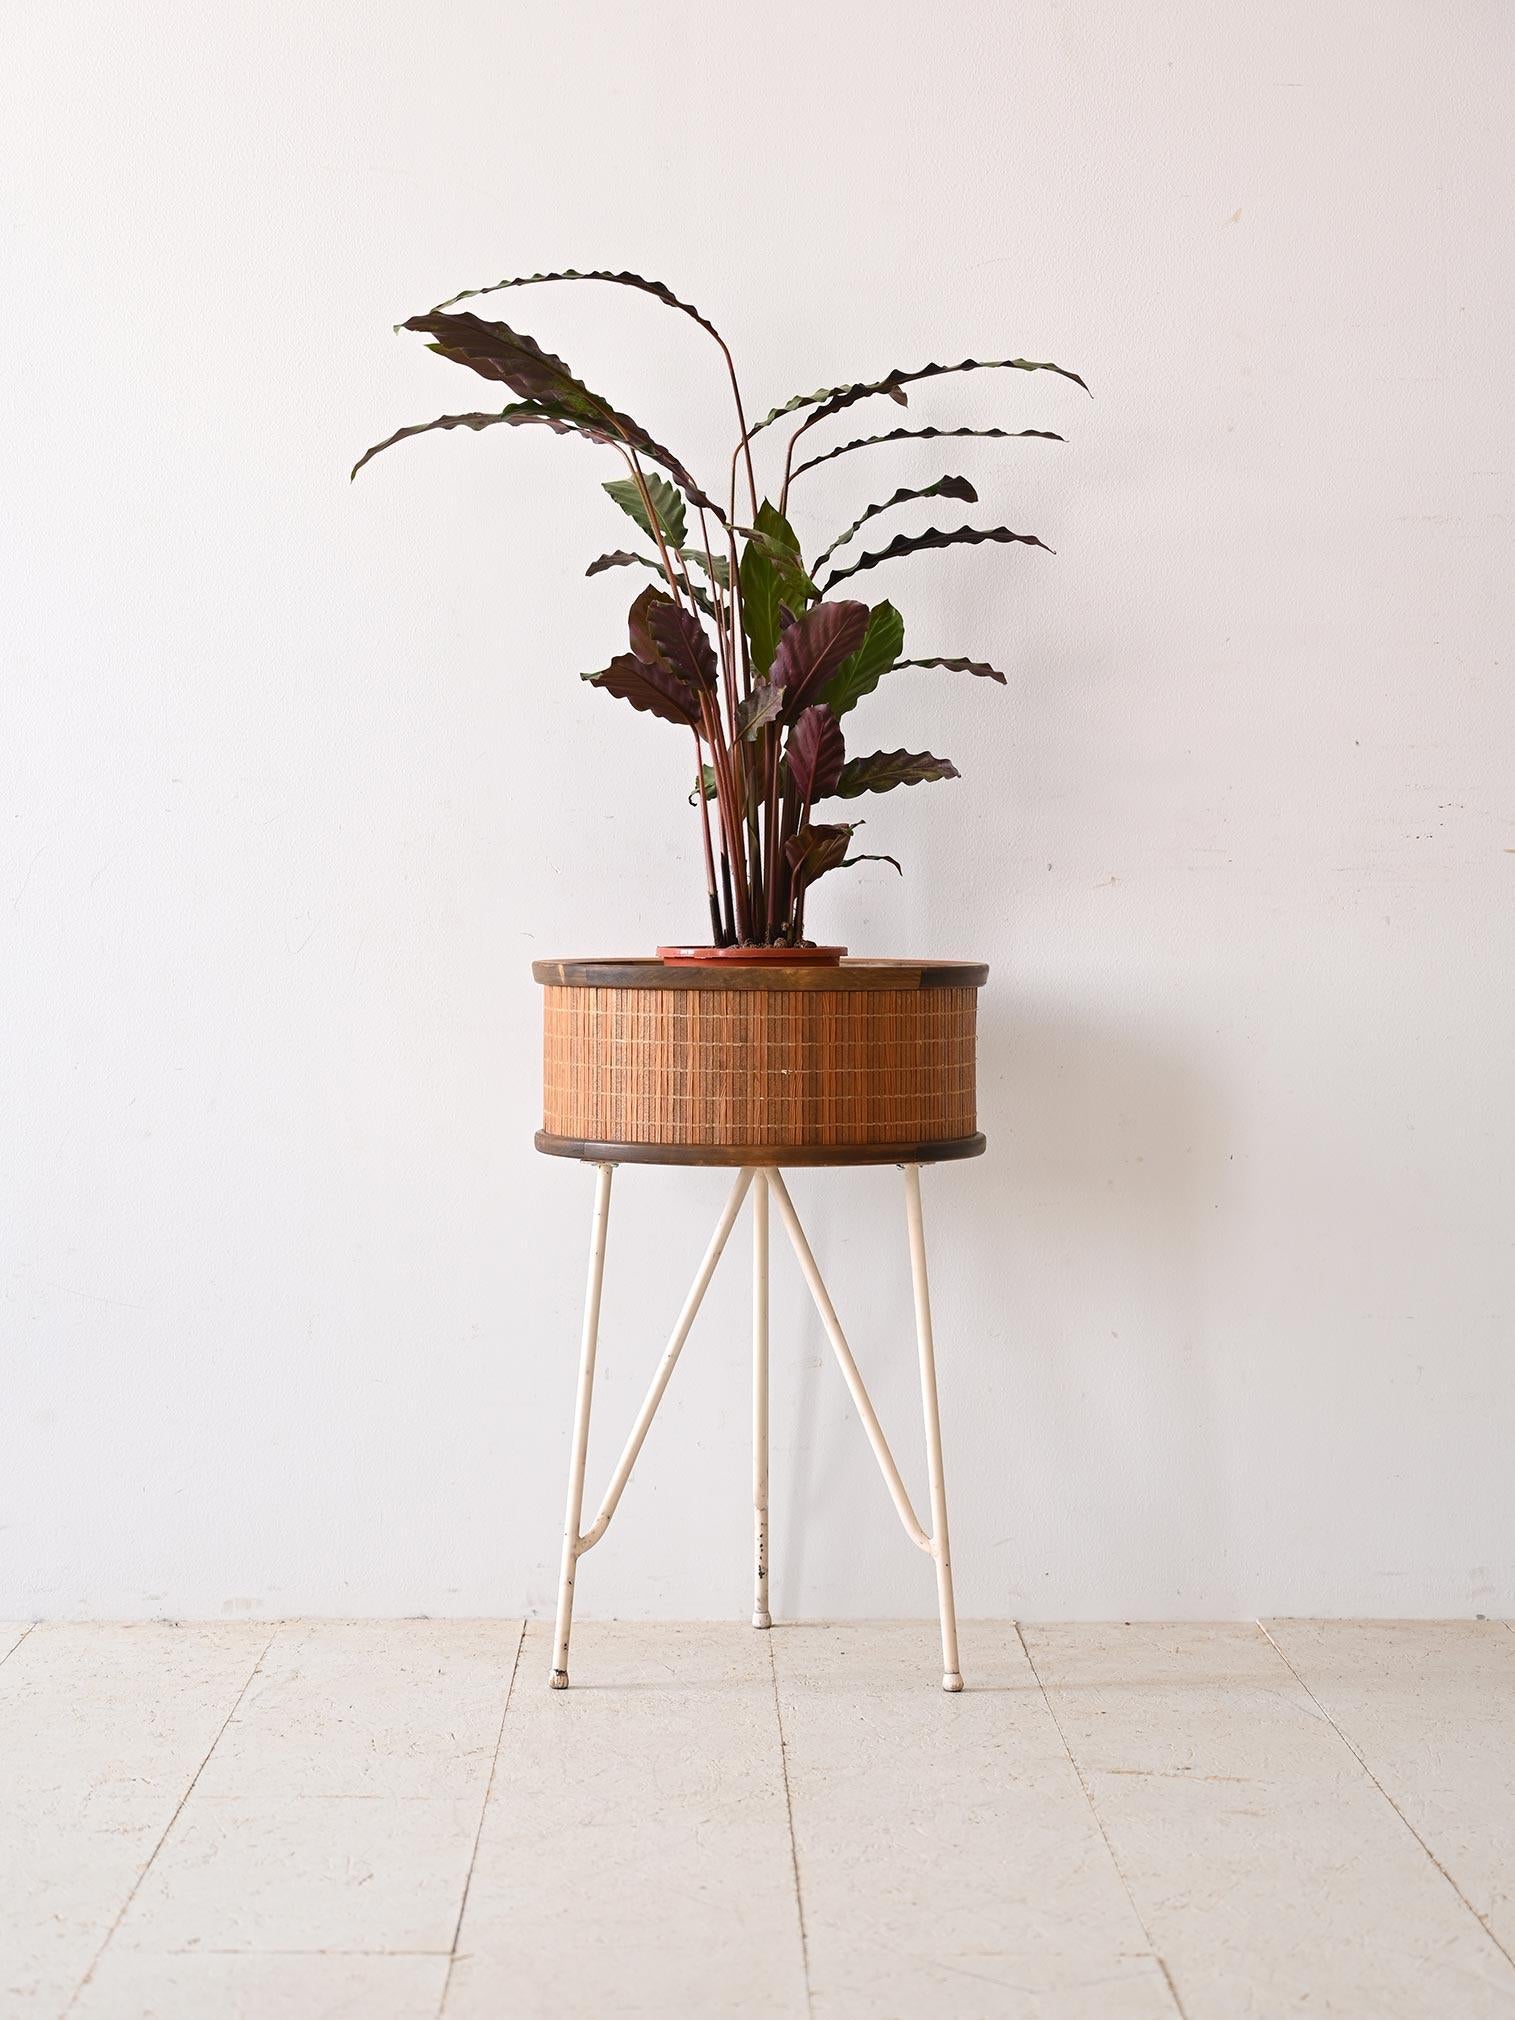 Particular flower stand of Nordic origin made of wood and metal.   
                            
White metal legs give the flower stand a modern, light touch, while the round planter is the focal point of the design. Made from wooden slats, the